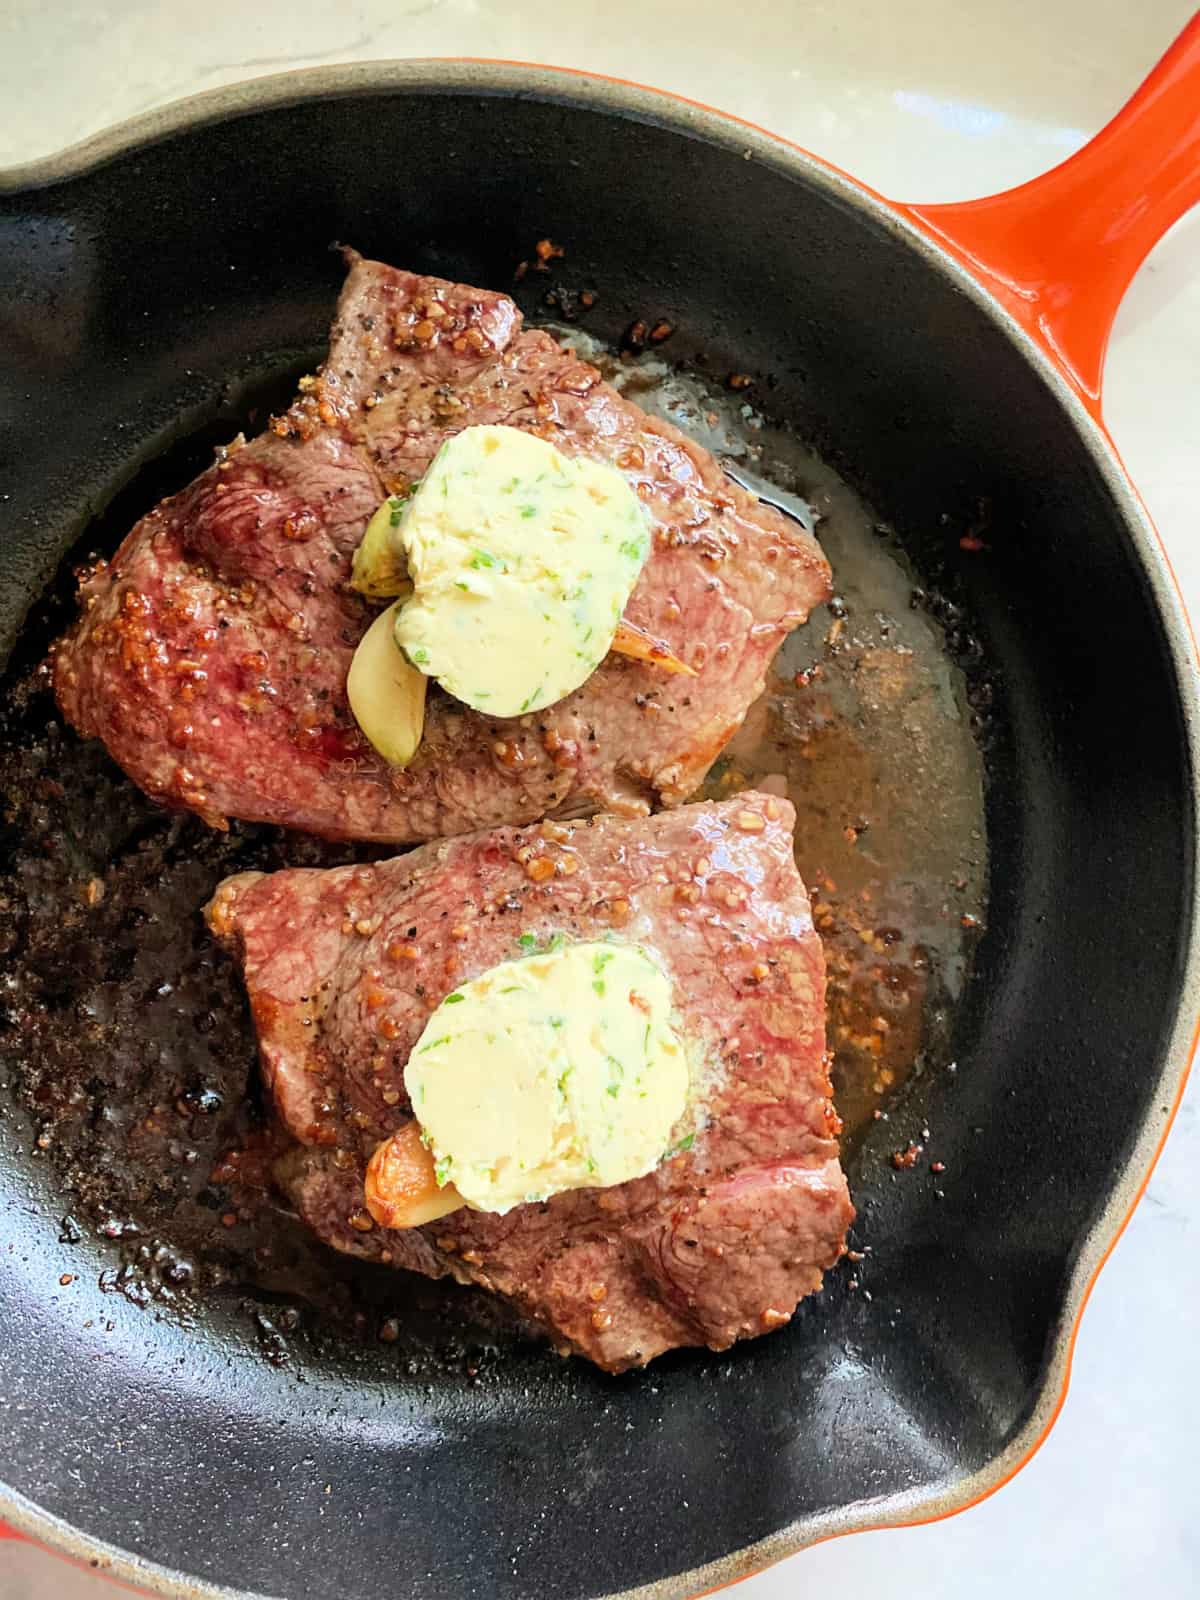 Two steaks in a cast iron skillet with compound butter on top.